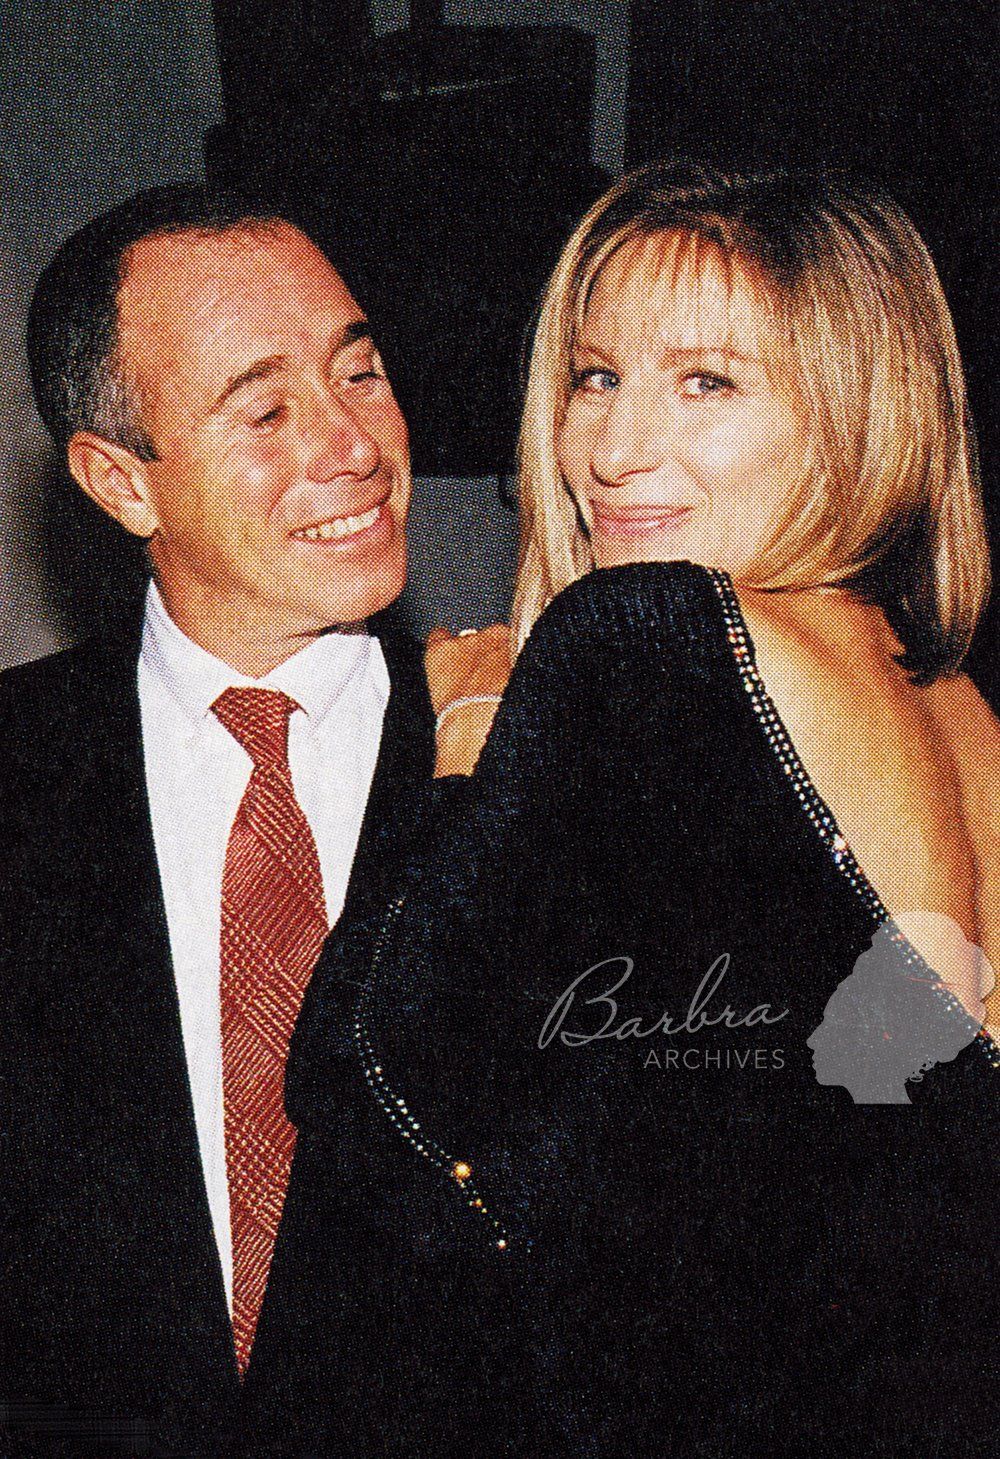 David Geffen and Streisand at the APLA event.